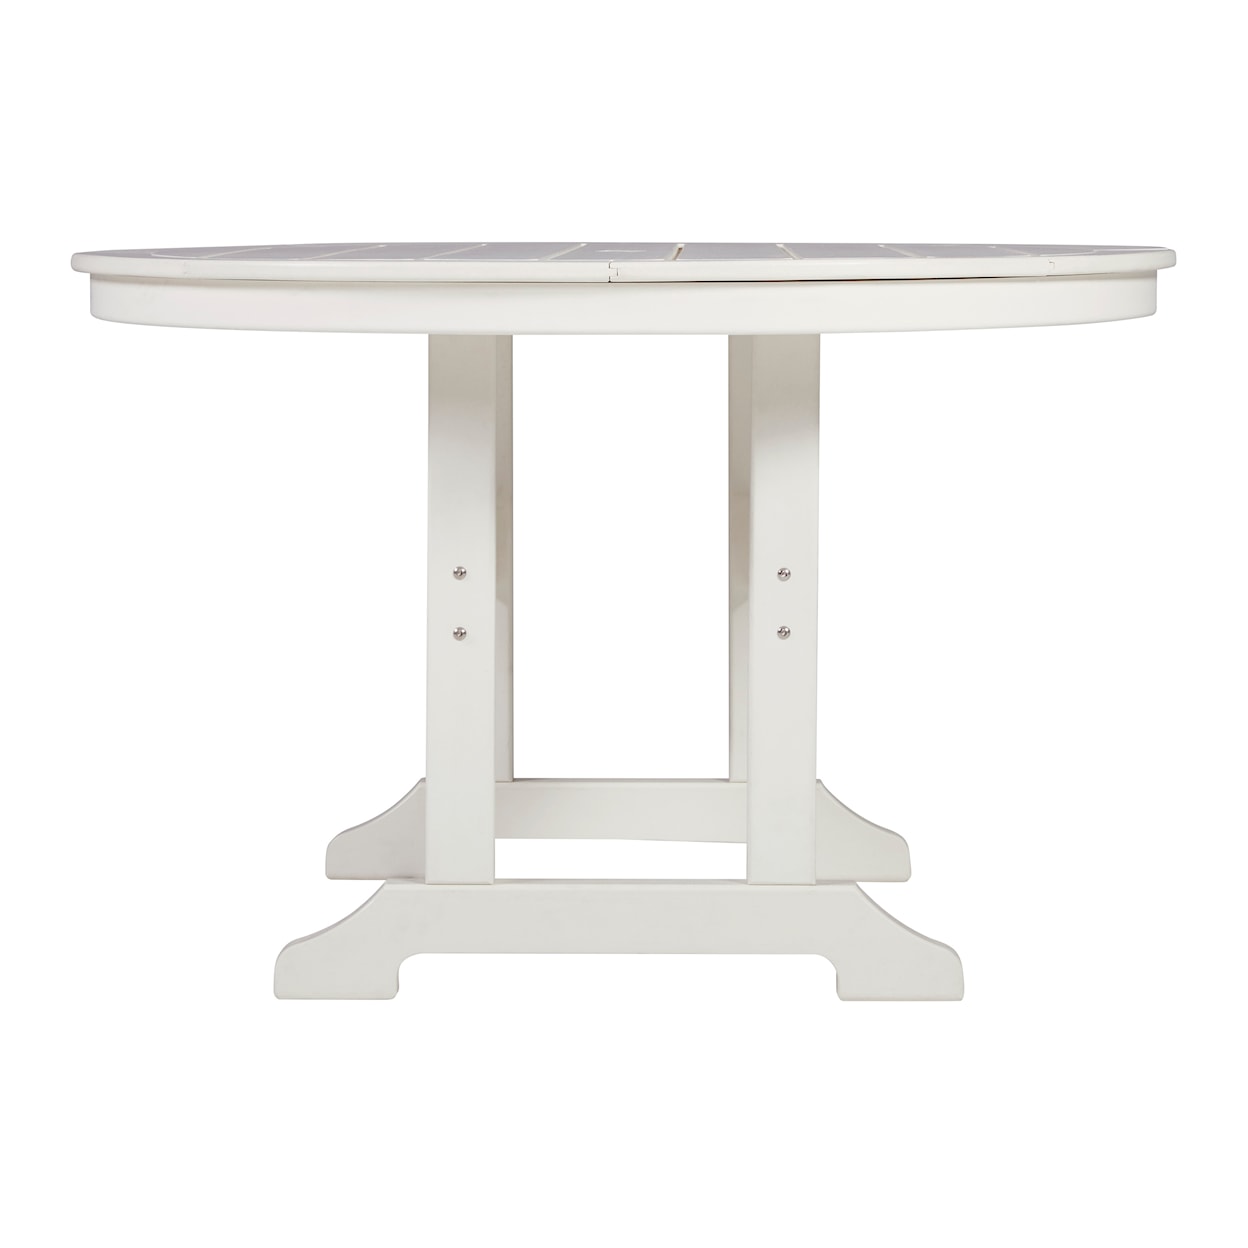 Ashley Furniture Signature Design Crescent Luxe Outdoor Dining Table